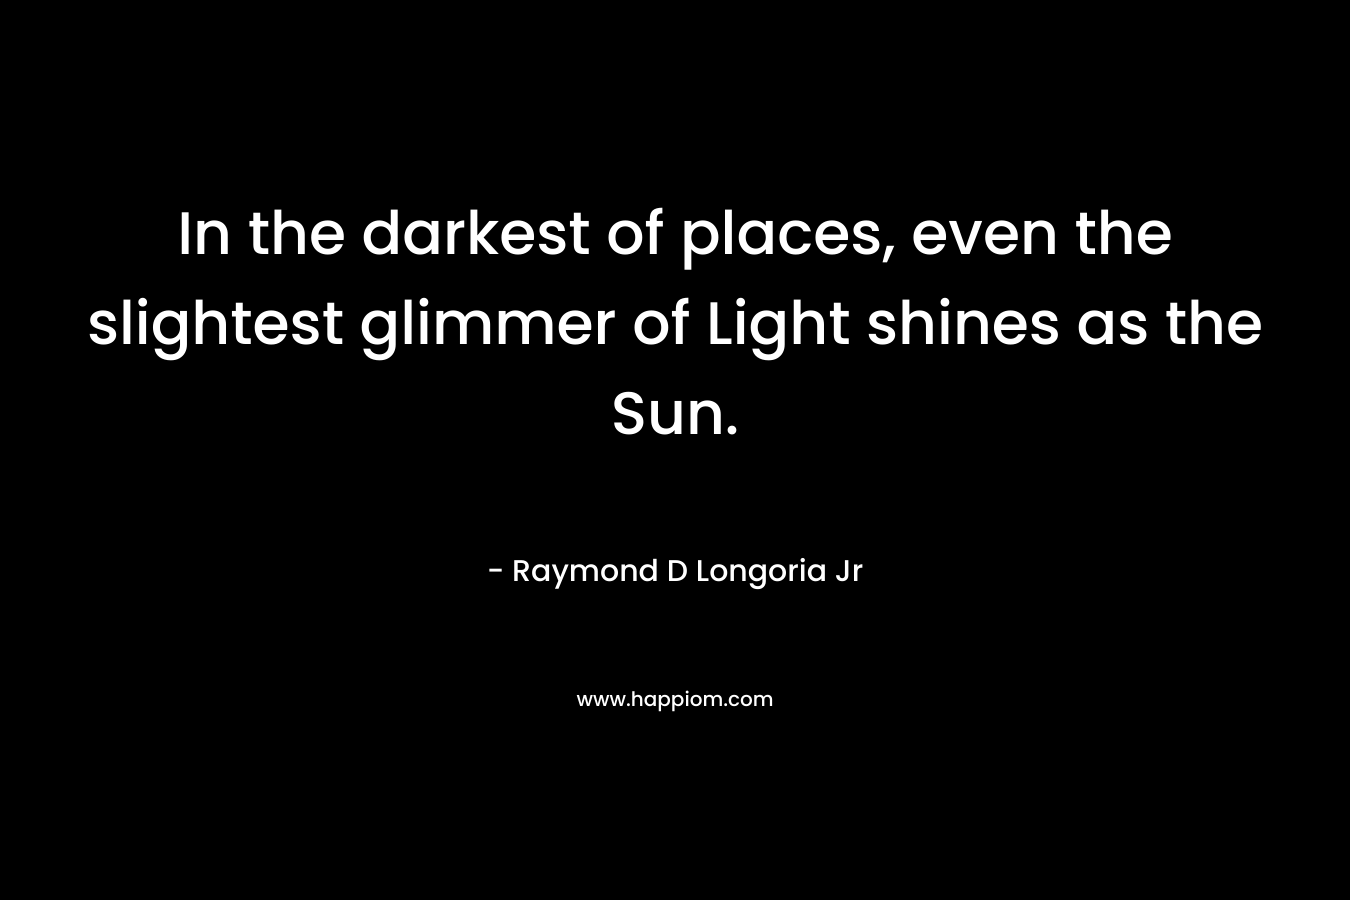 In the darkest of places, even the slightest glimmer of Light shines as the Sun.